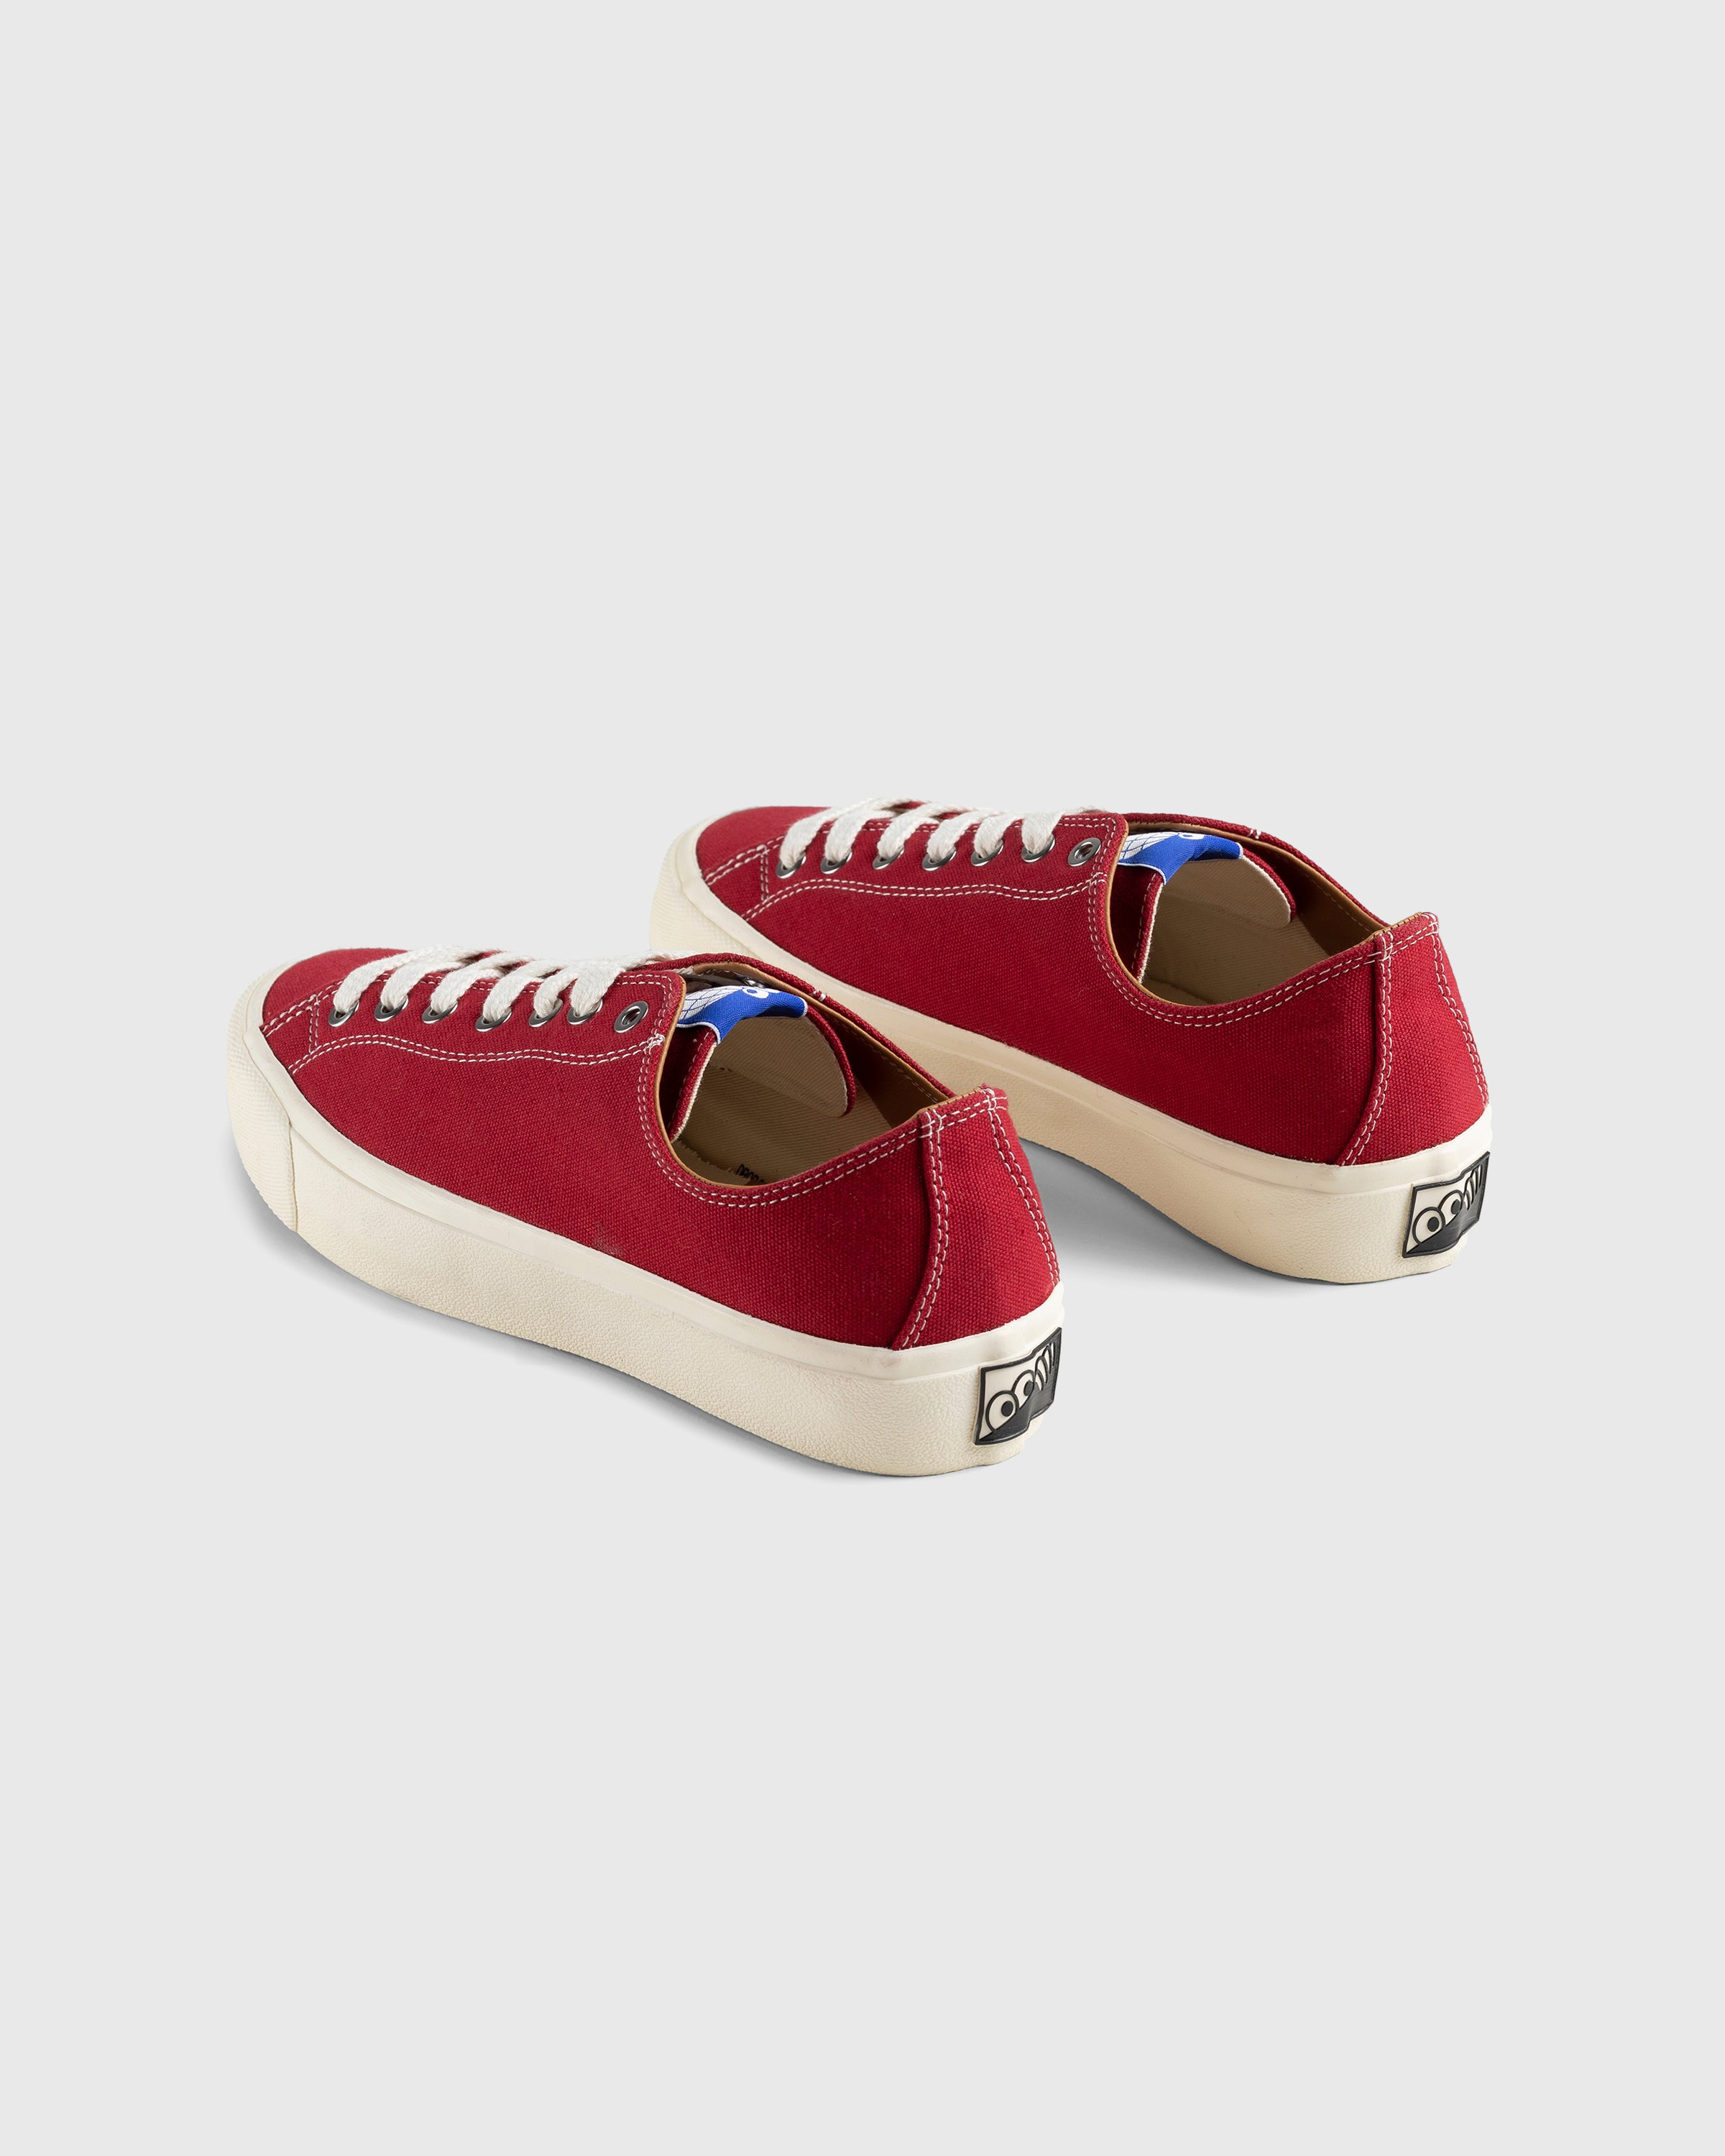 Last Resort AB - VM003-Canvas LO Classic Red/White - Footwear - Red - Image 4